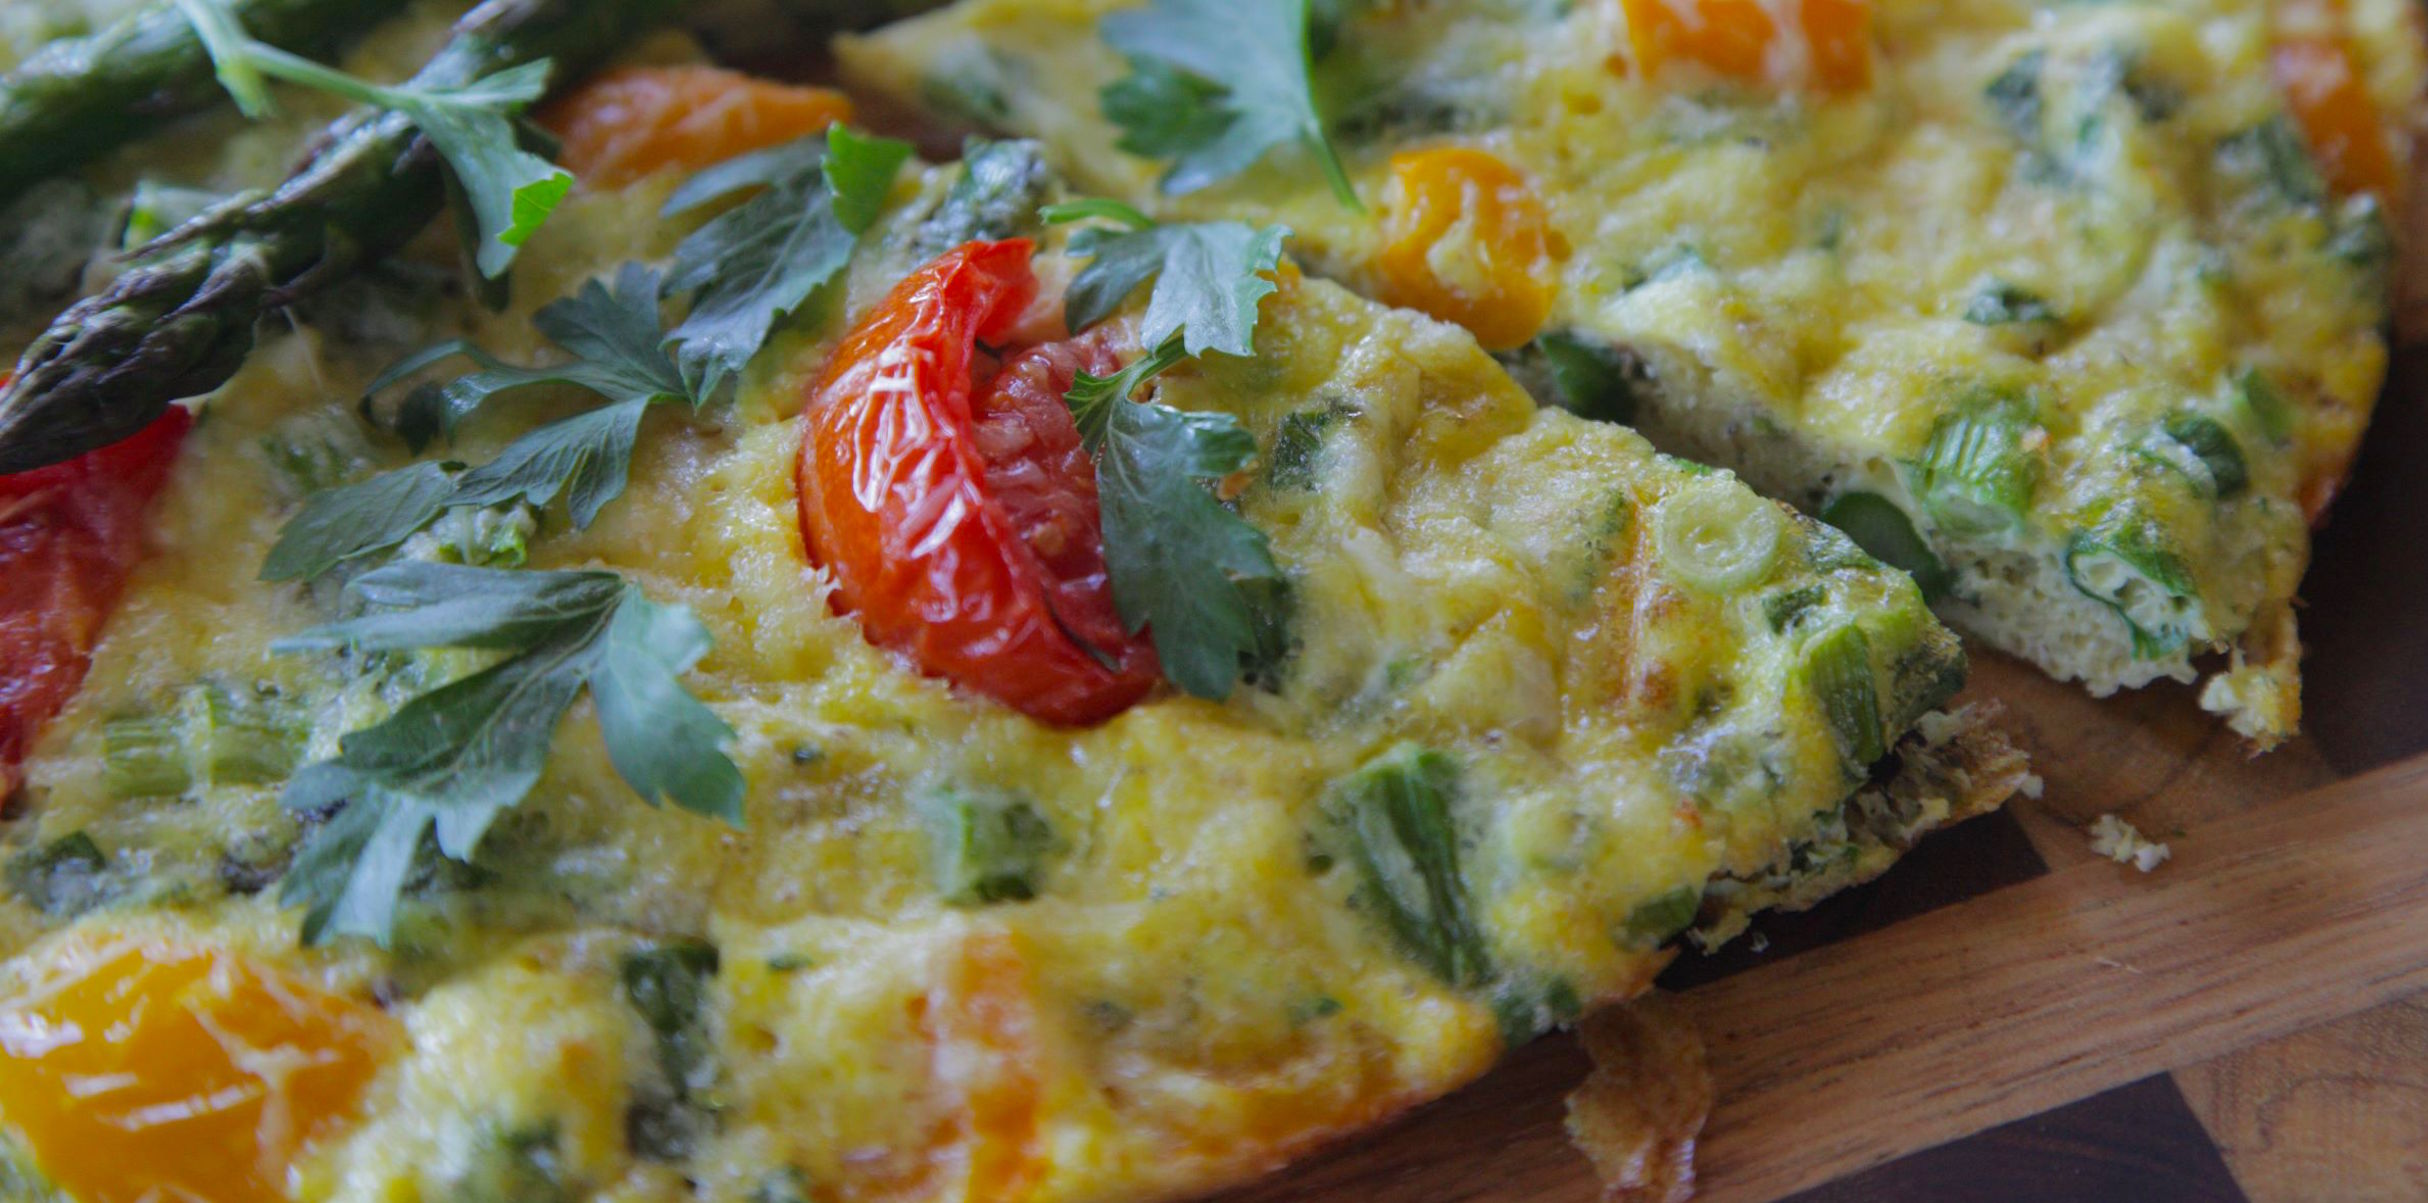 Asparagus Fritatta from book "Visionary Kitchen: A Cookbook for Eye Health"